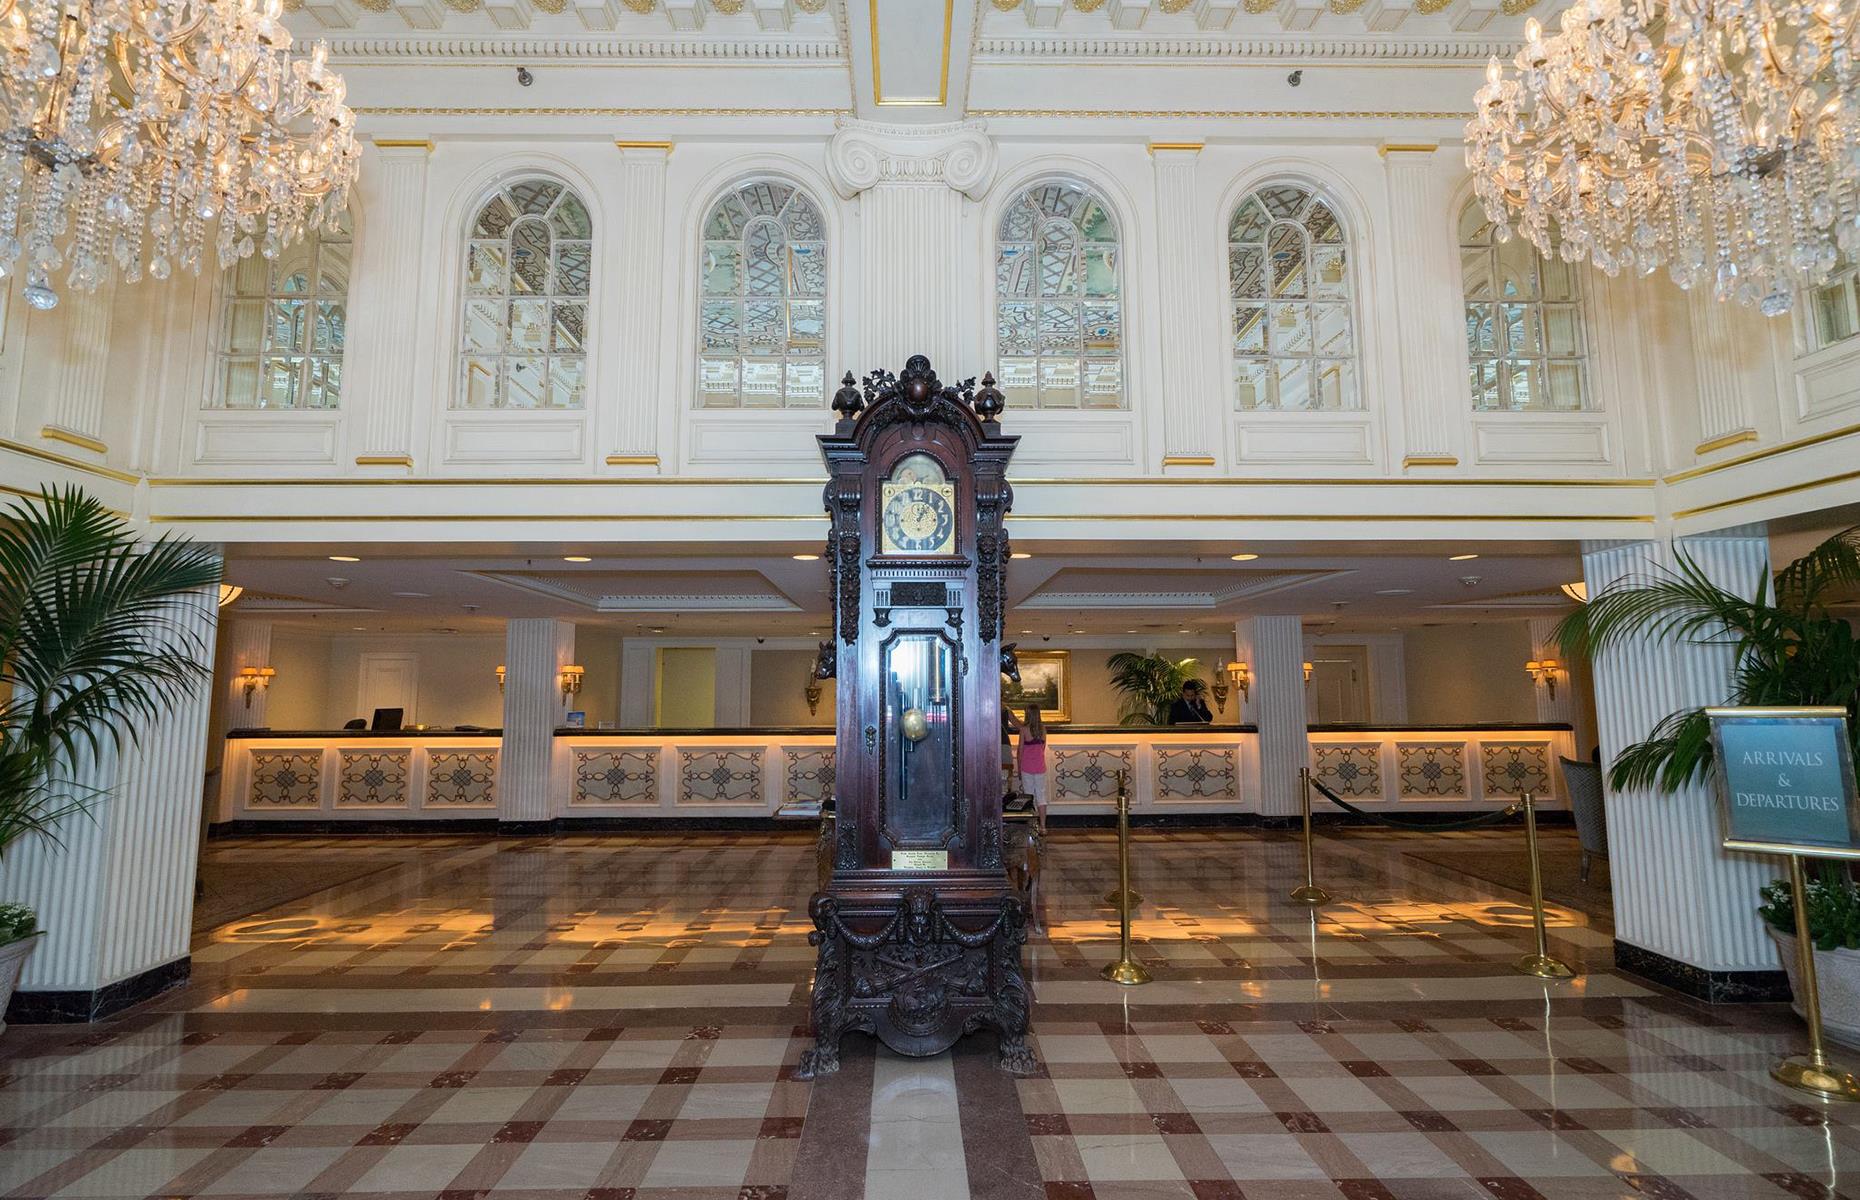 <p>A French Quarter icon, the deluxe <a href="https://www.booking.com/hotel/us/monteleone.en-gb.html?aid=1280739" rel="nofollow” target=">Hotel Monteleone</a> has been run by five generations of the same family since it opened in 1886. That's plenty of time to build up loyal customers and acquire a few lingering former guests. Frequent reports of paranormal activity led to a visit by the International Society of Paranormal Research, who discovered all sorts of ghostly goings-on, particularly on the 14th floor where Maurice, a former maid, is said to have never left her housekeeping duties.</p>  <p><a href="https://www.loveexploring.com/guides/74898/explore-new-orleans-the-top-things-to-do-where-to-stay-what-to-eat"><strong>See where else to stay and what to do in our guide to New Orleans here</strong></a></p>